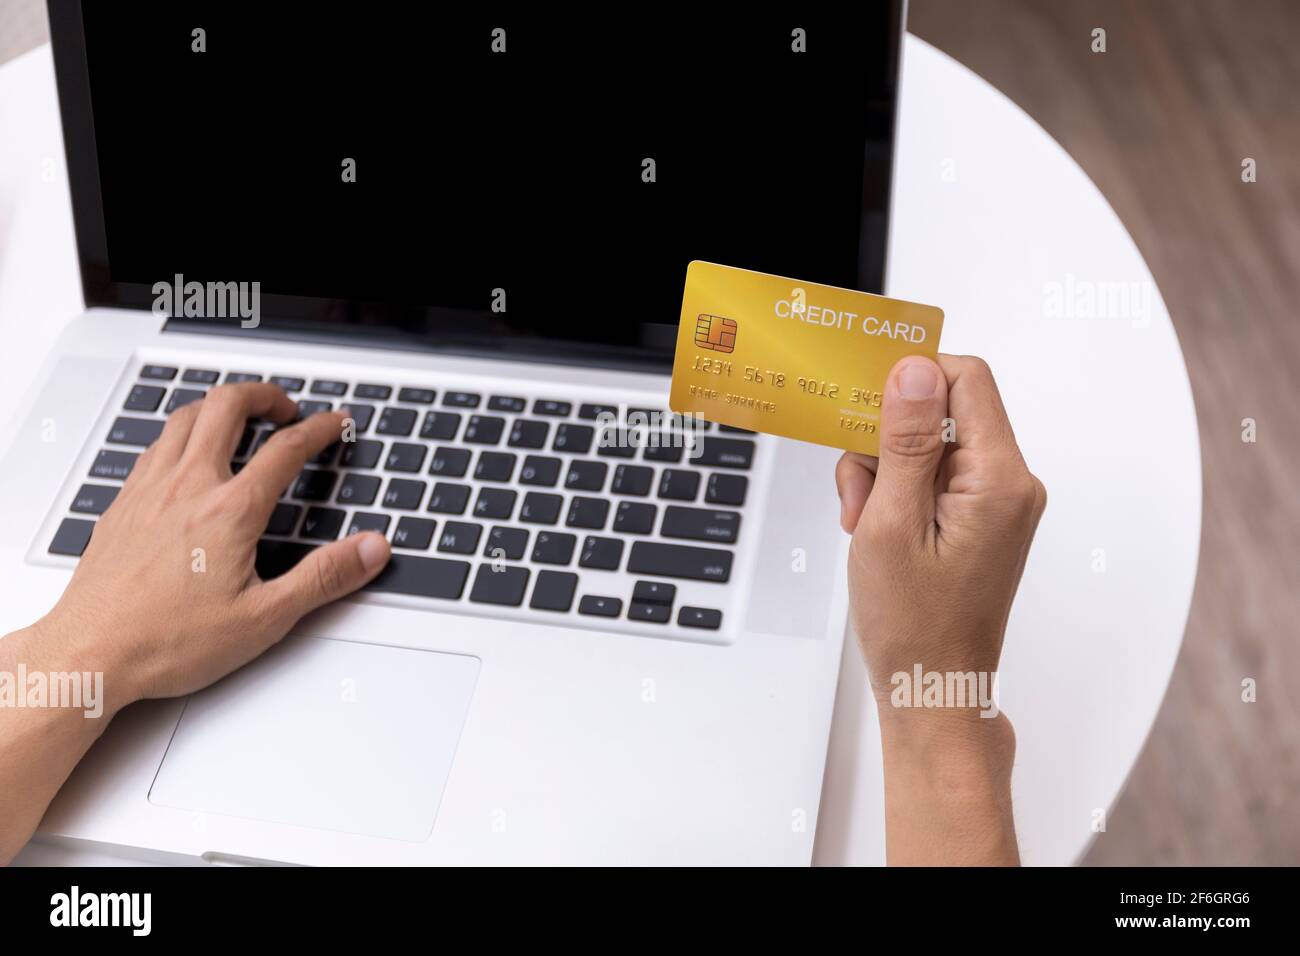 Young woman holding credit card and using laptop computer. Women working at home. Online shopping, e-commerce, internet banking, spending money, worki Stock Photo